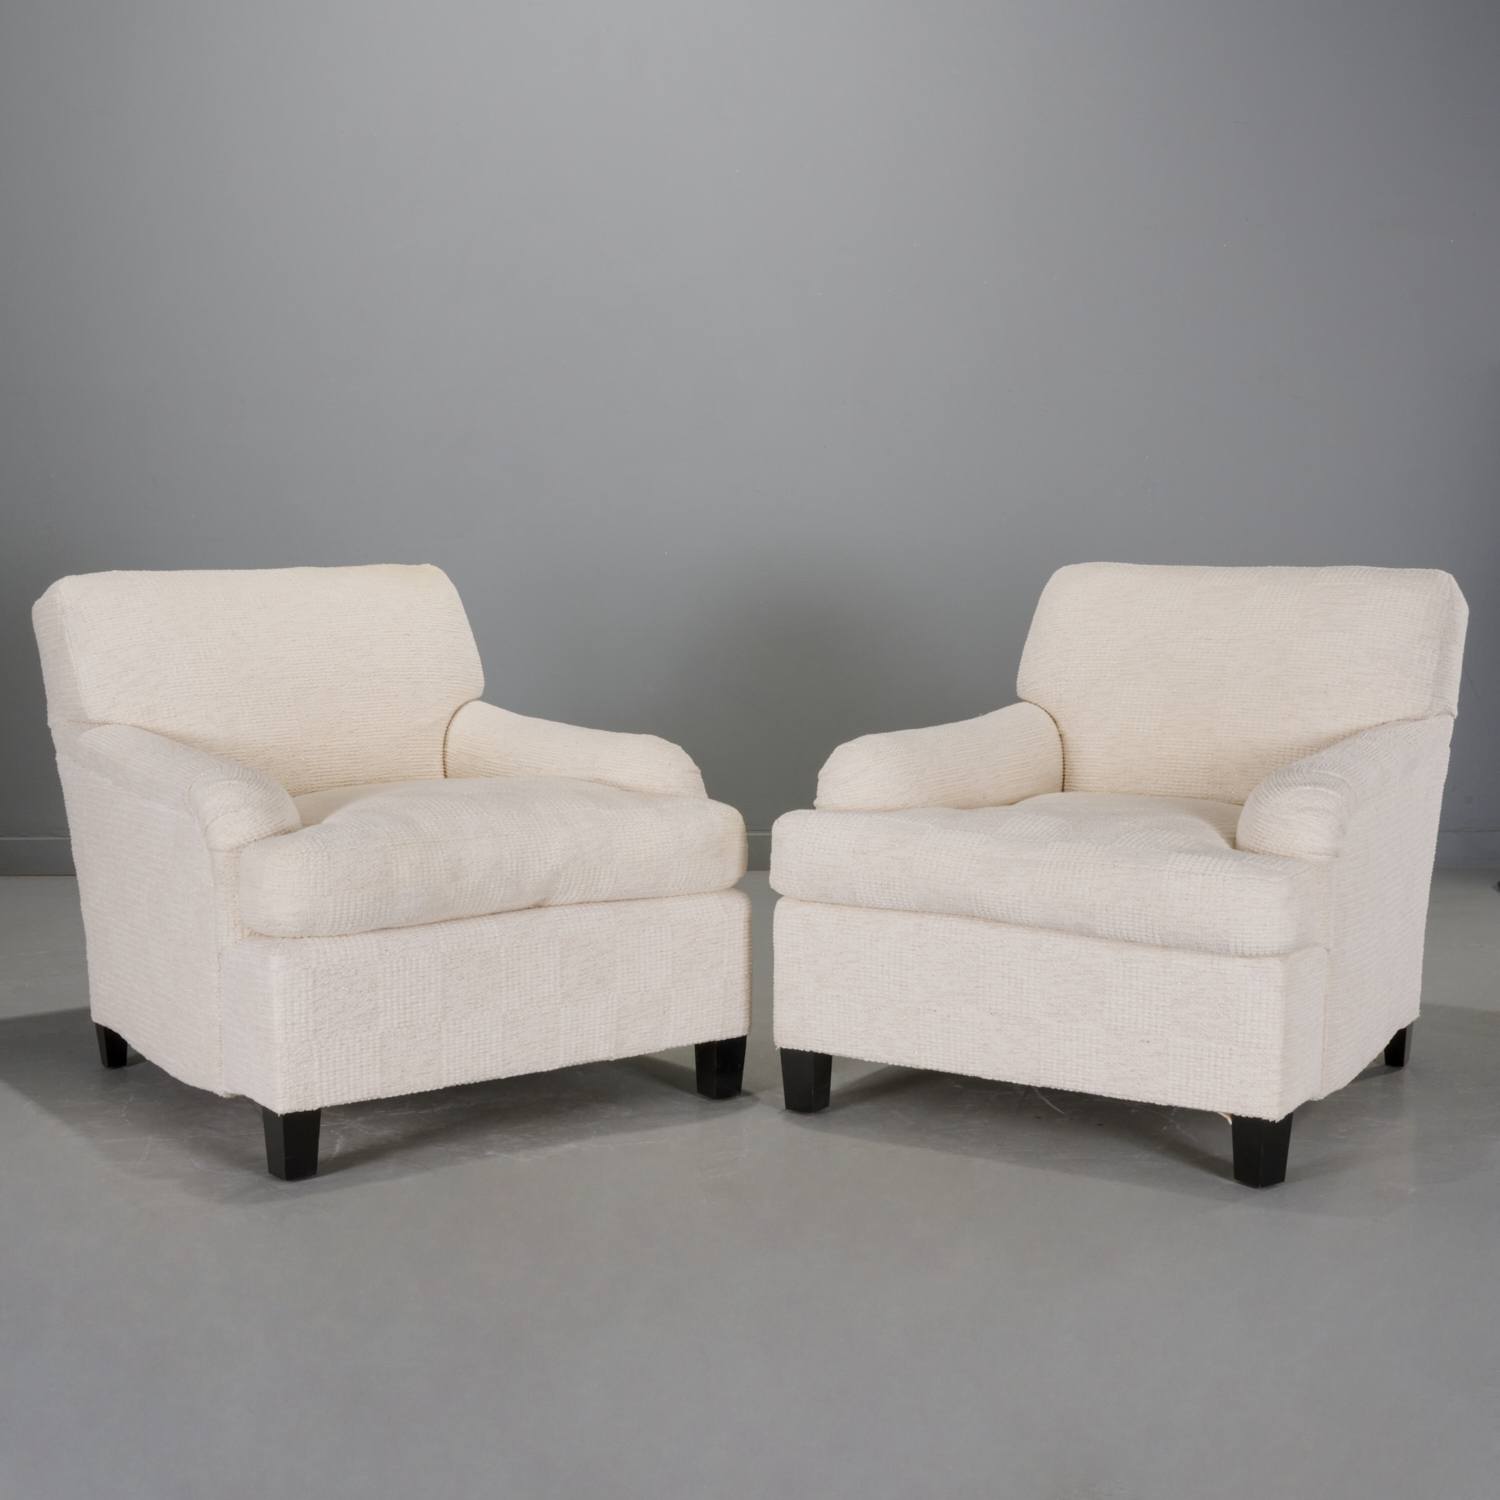 PAIR JM FRANK AFTER CLUB CHAIRS  29d254